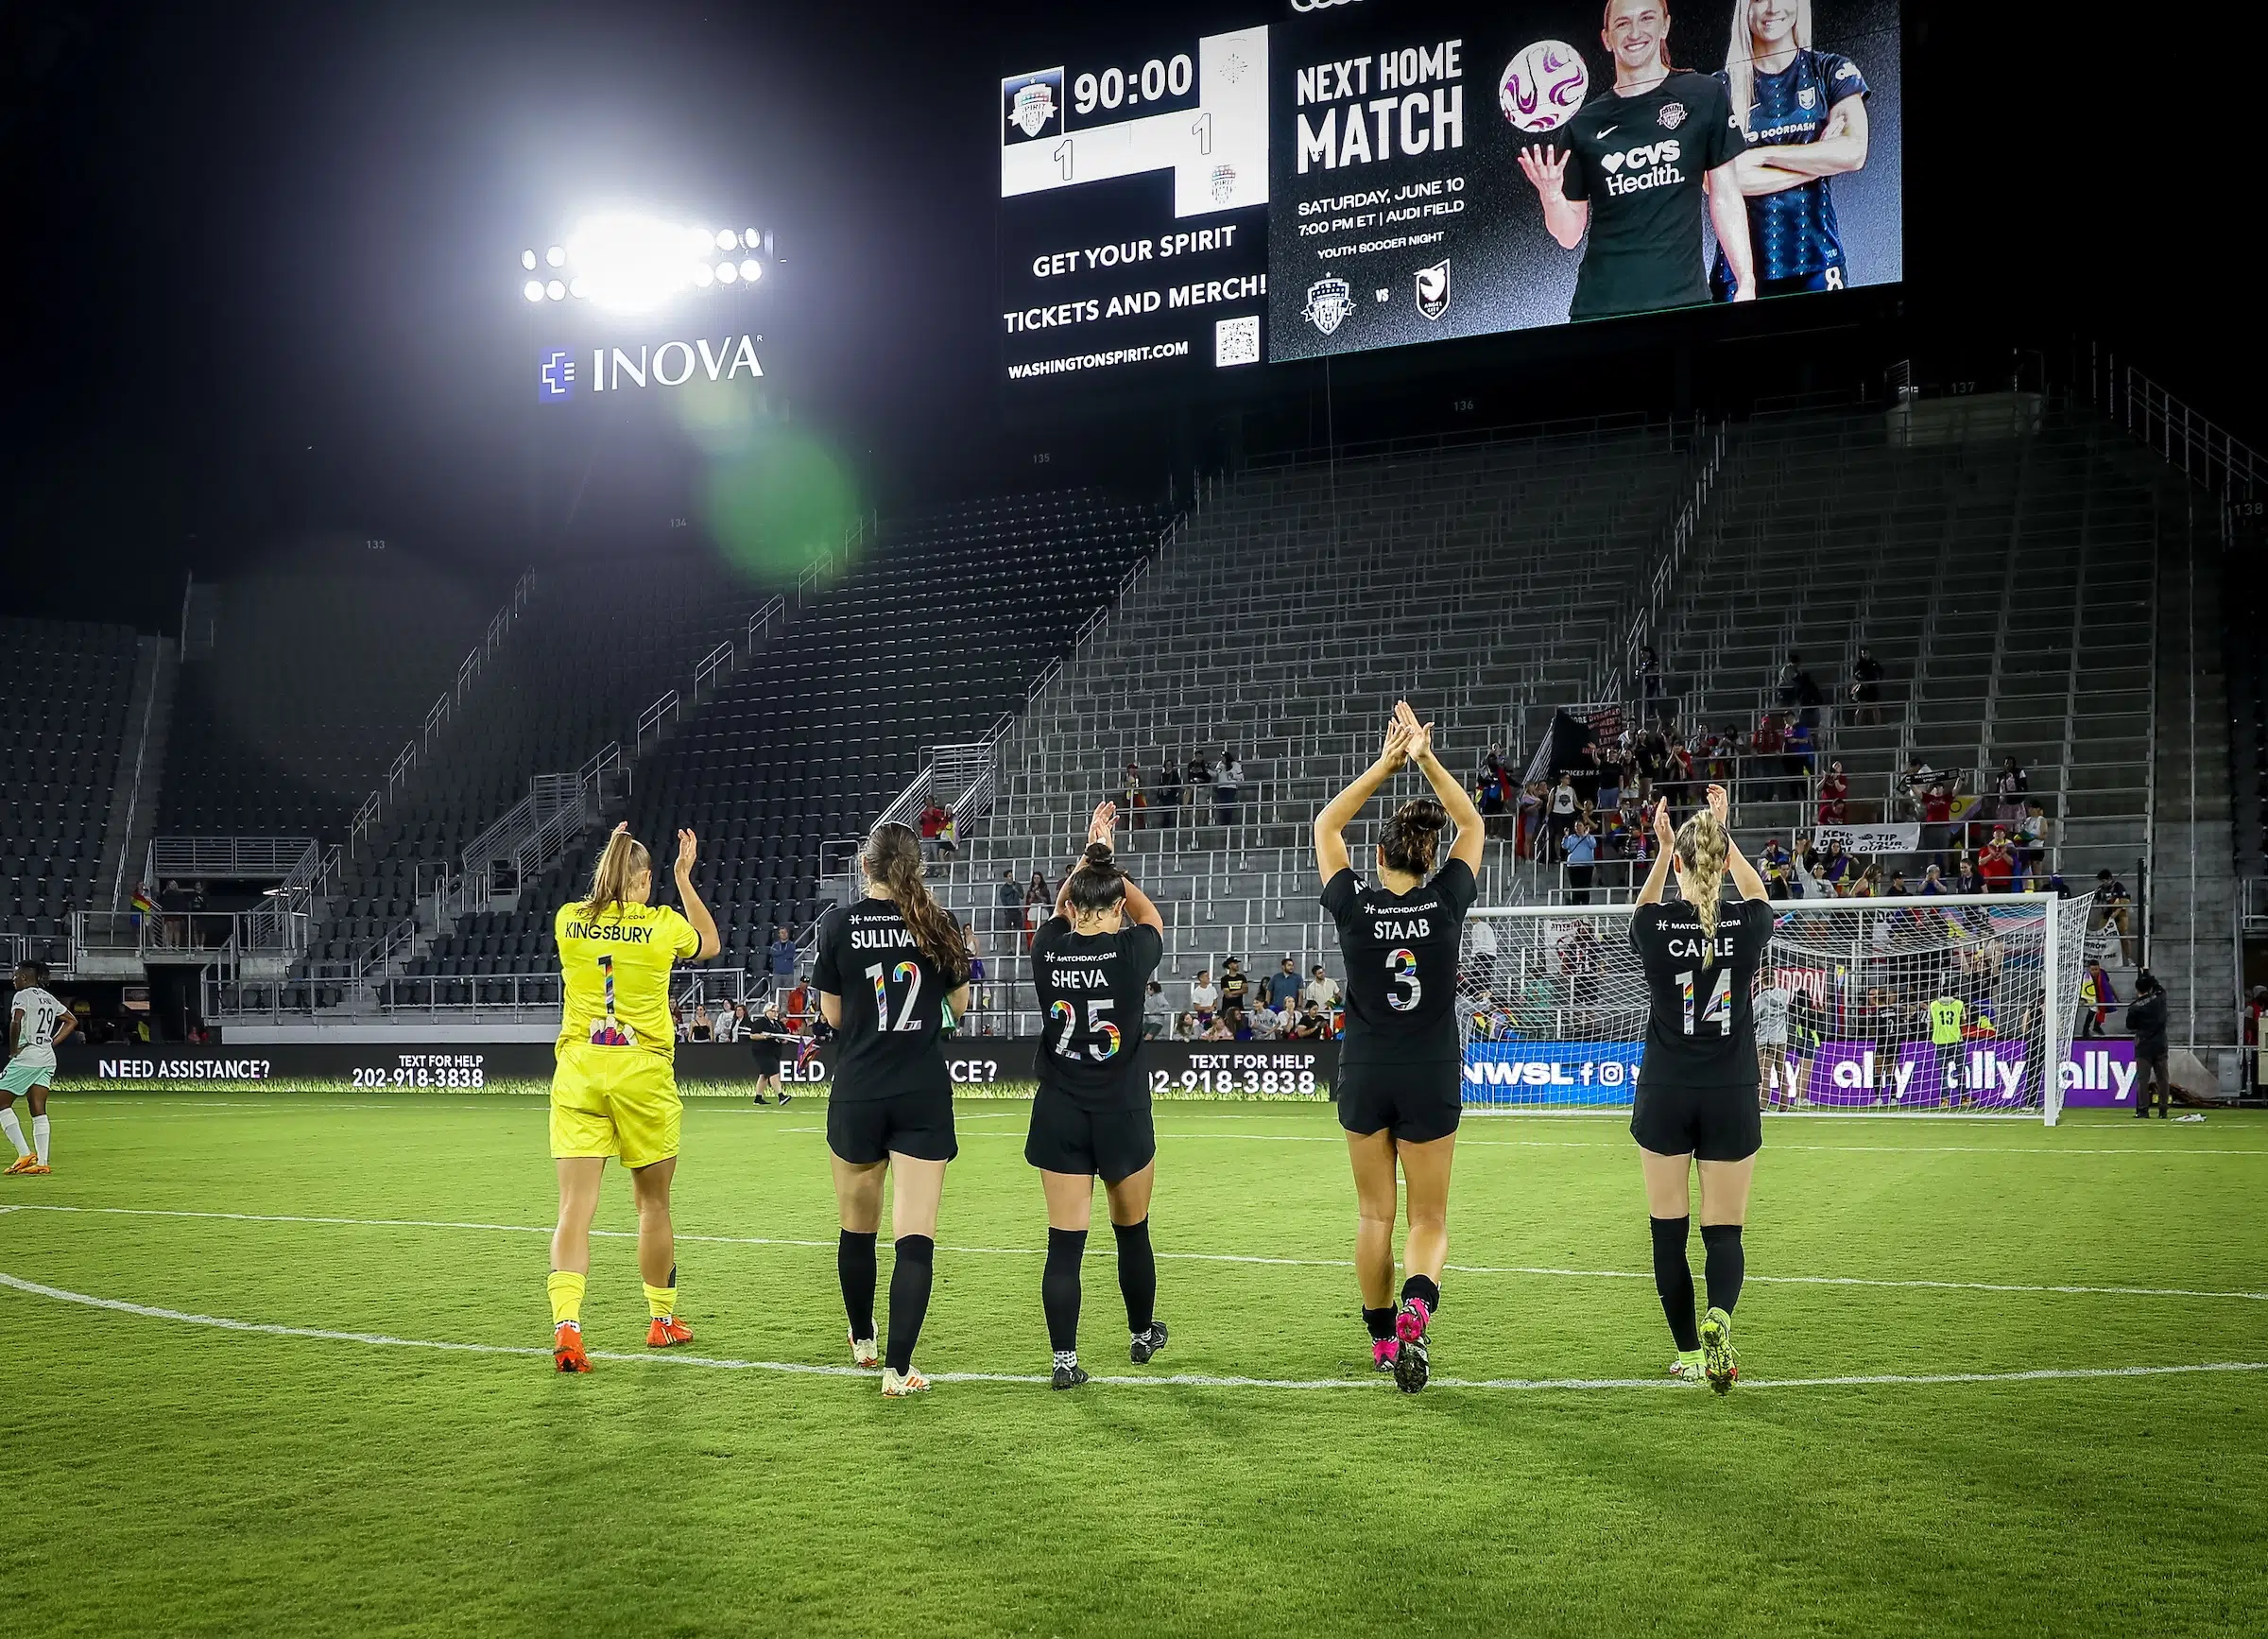 Four players in black uniforms and one in a yellow uniform clap their hands over their heads in appreciation to fans in the stands.